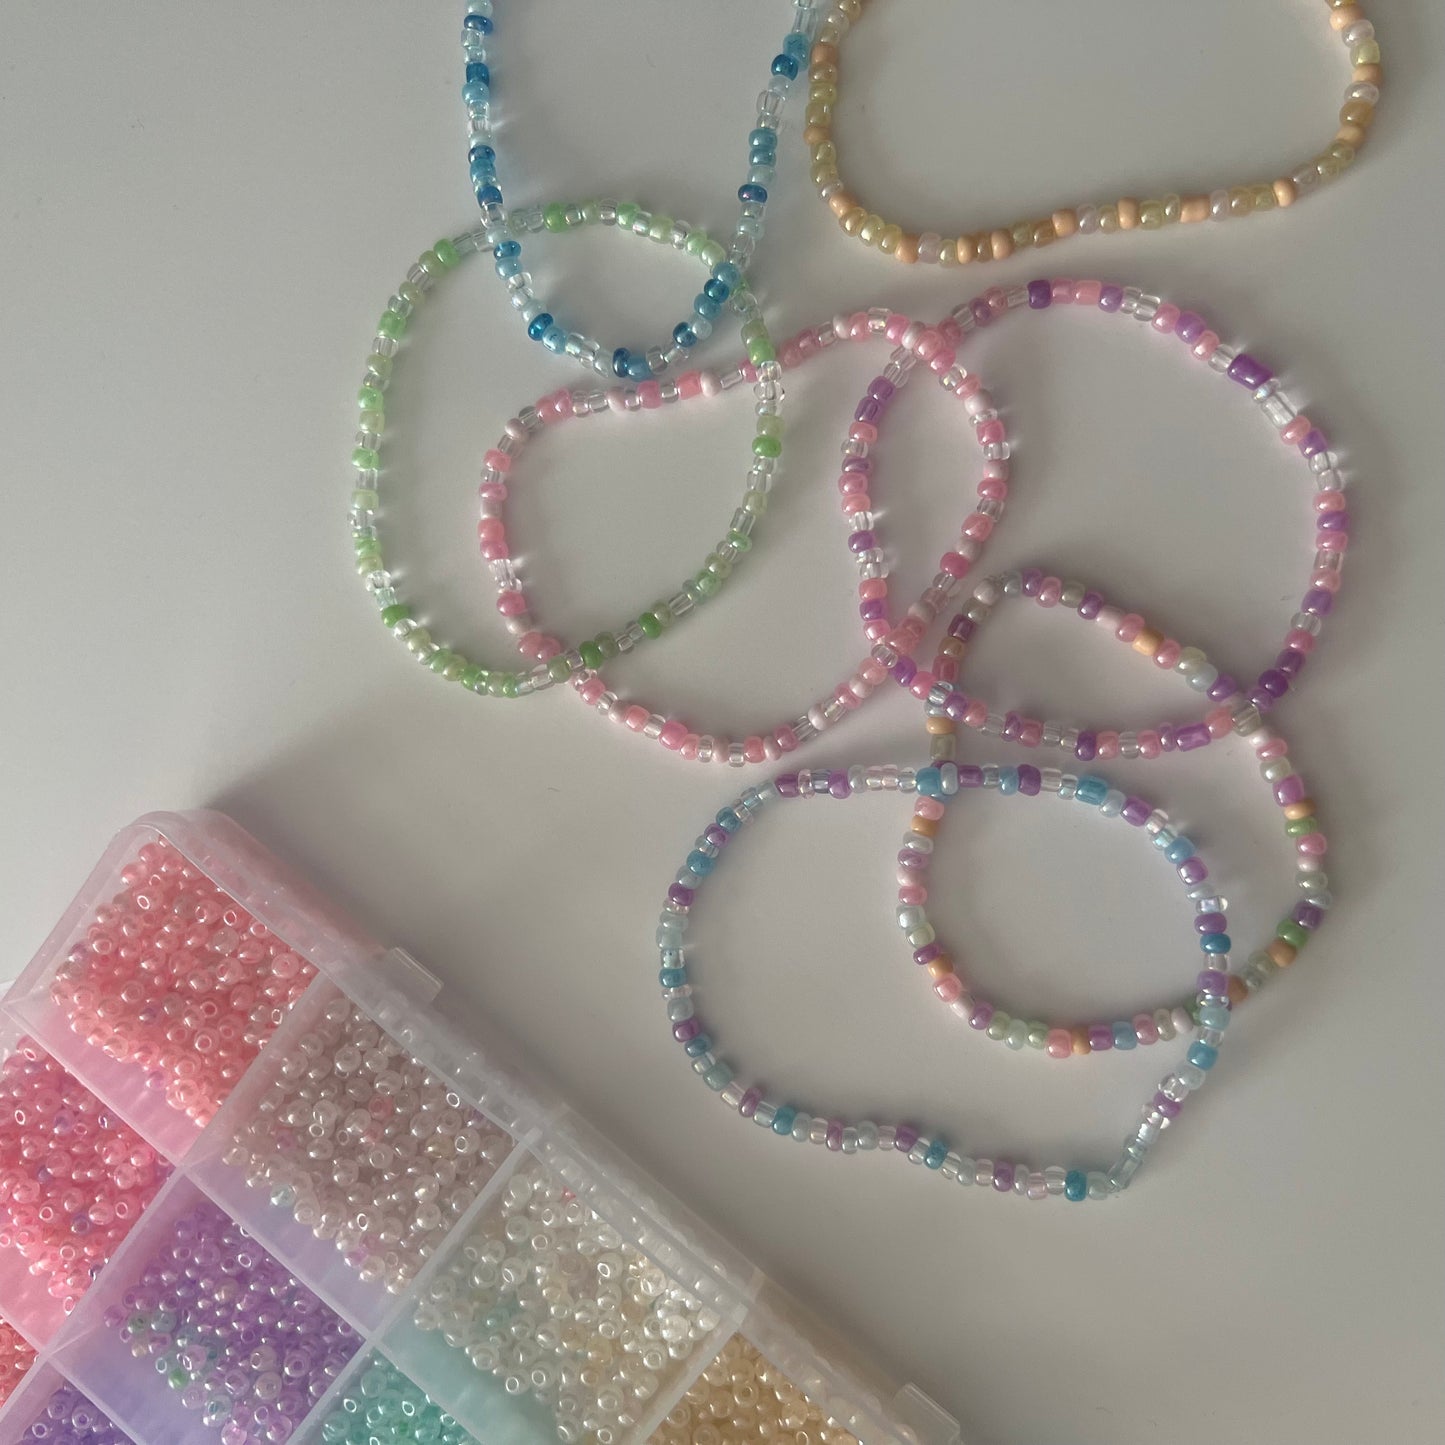 Rainbow Stackable Beads